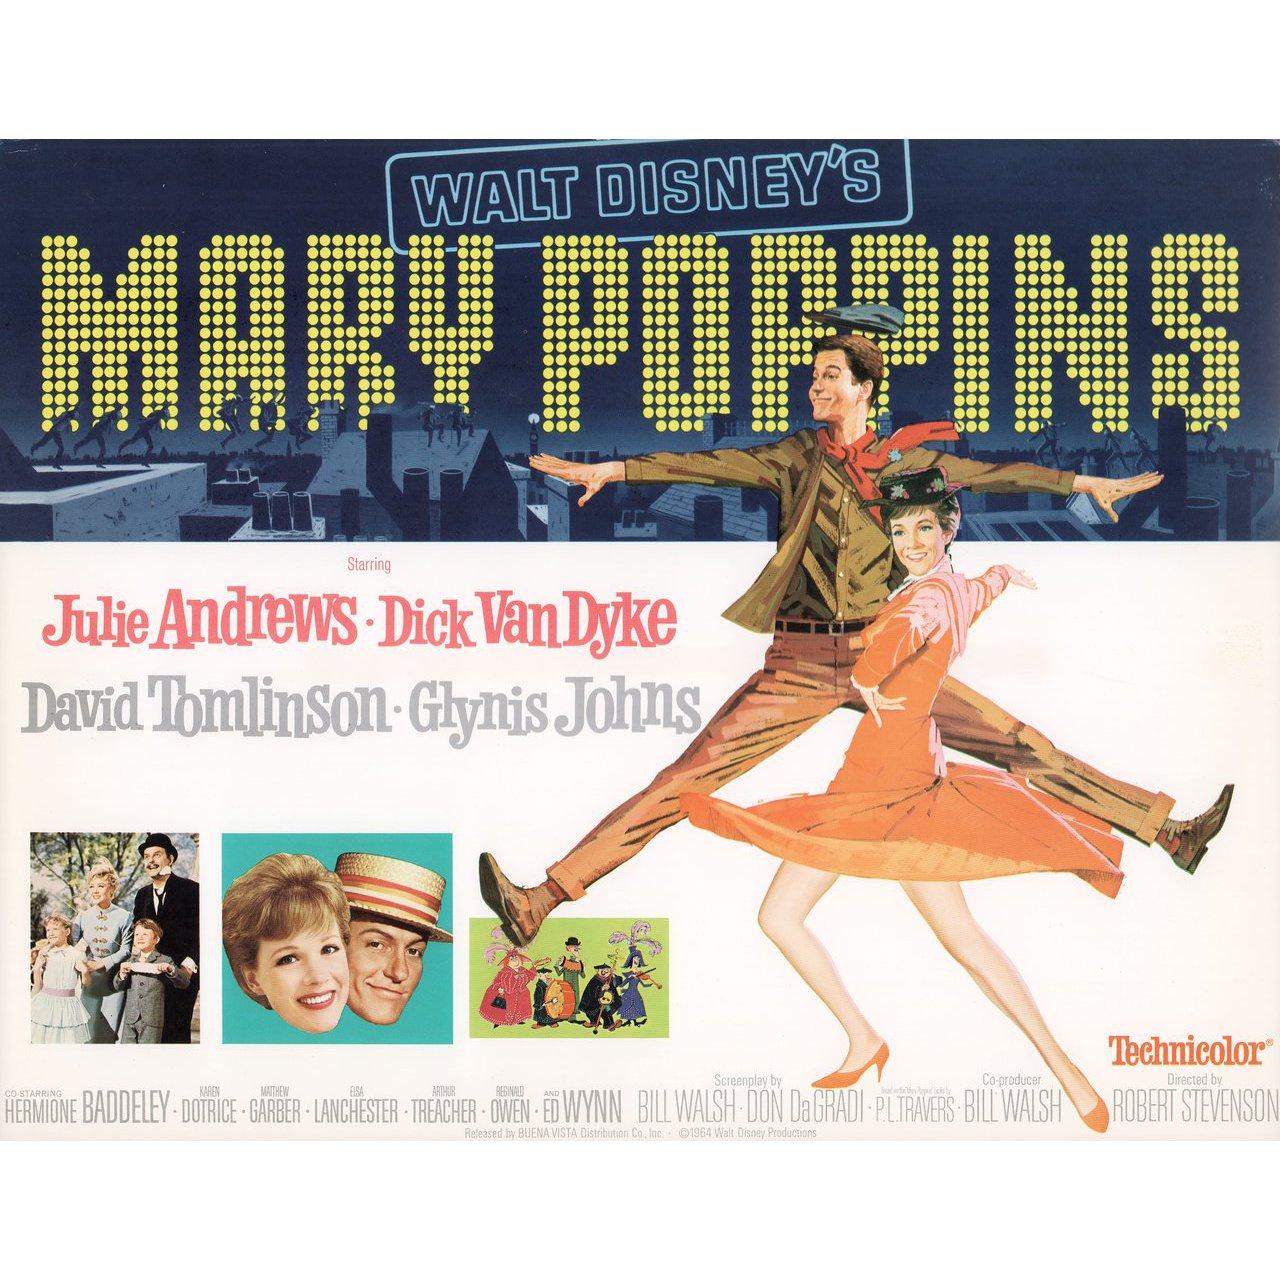 Original 1964 U.S. lobby card set for the film Mary Poppins directed by Robert Stevenson with Julie Andrews / Dick Van Dyke / David Tomlinson / Glynis Johns. Fine condition. Please note: the size is stated in inches and the actual size can vary by